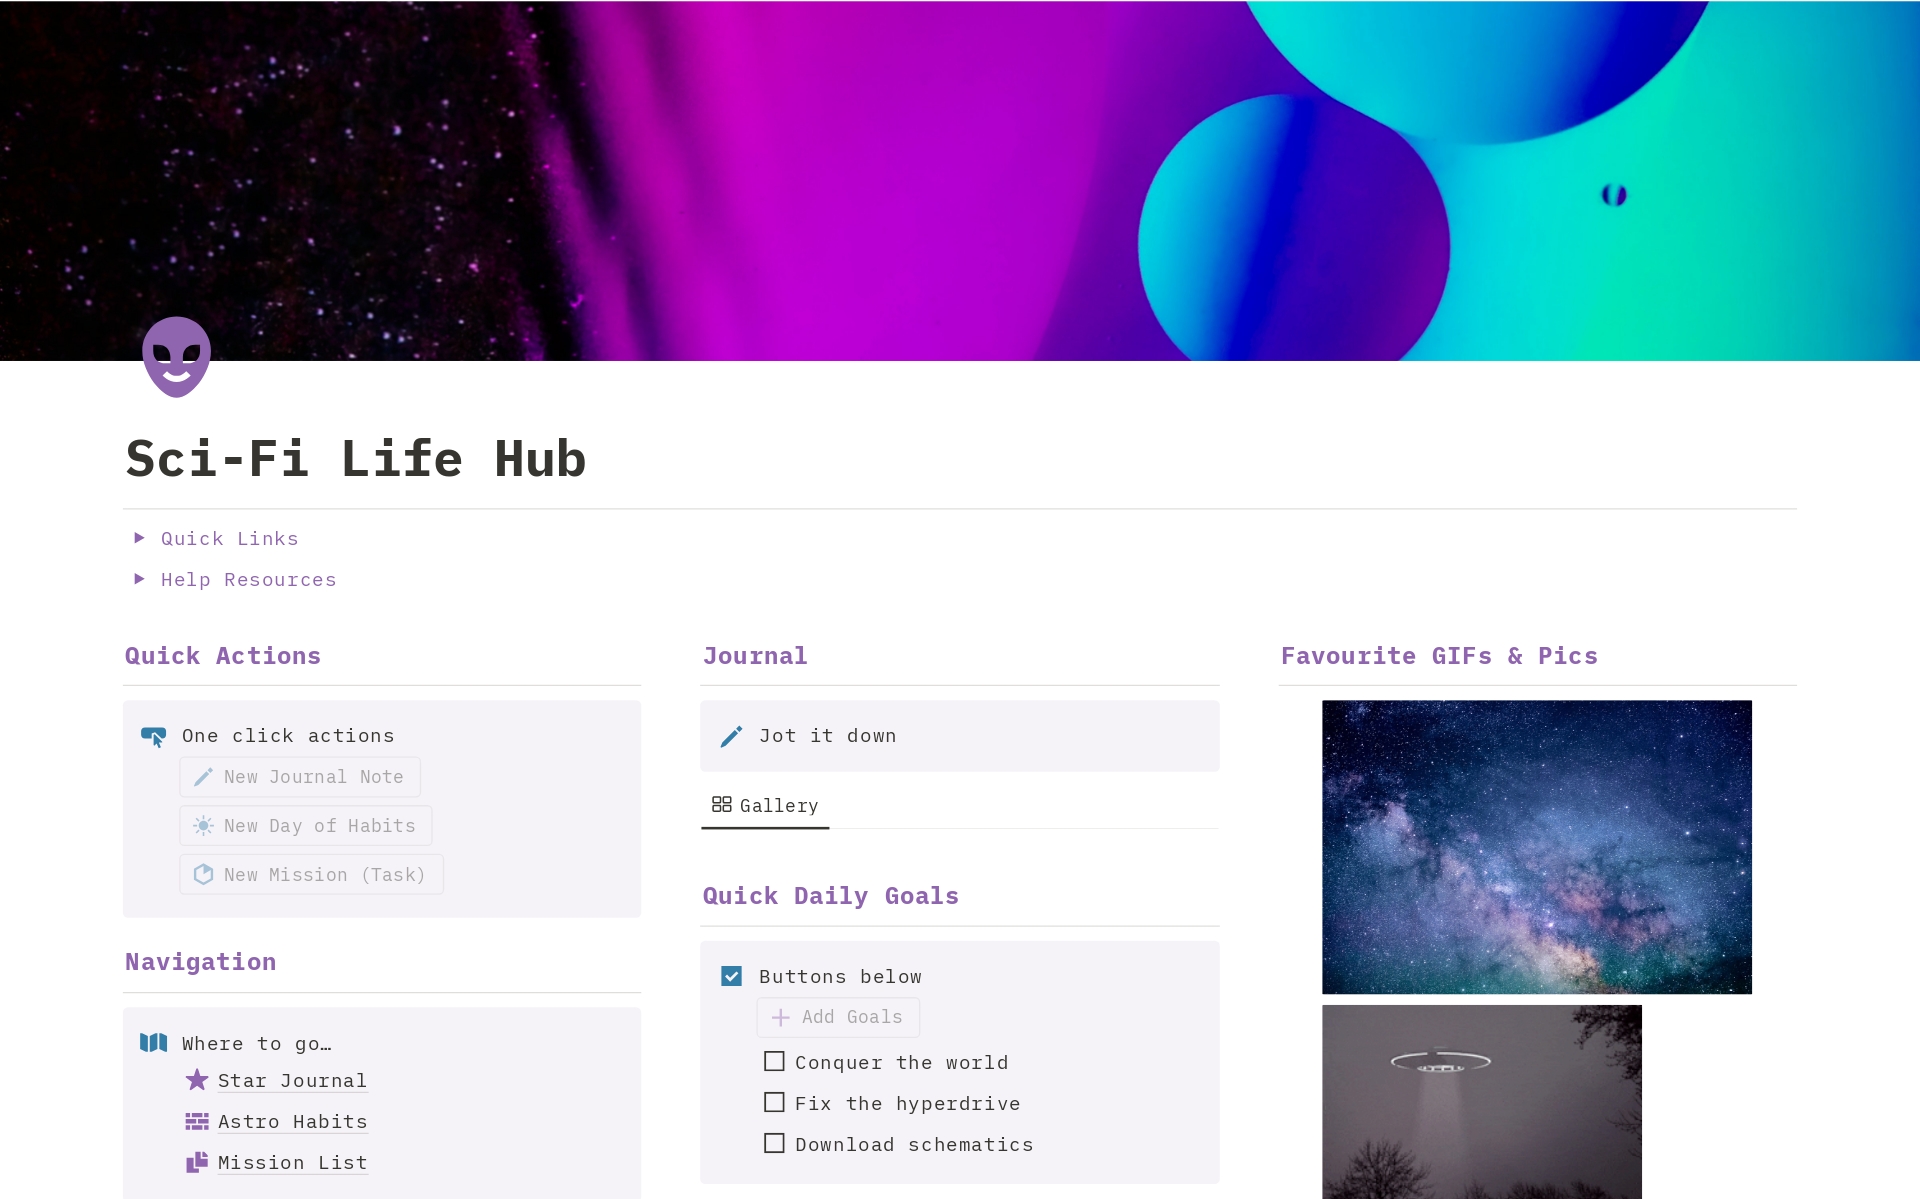 Elevate your daily routine to intergalactic heights with our Sci-Fi Life Hub!